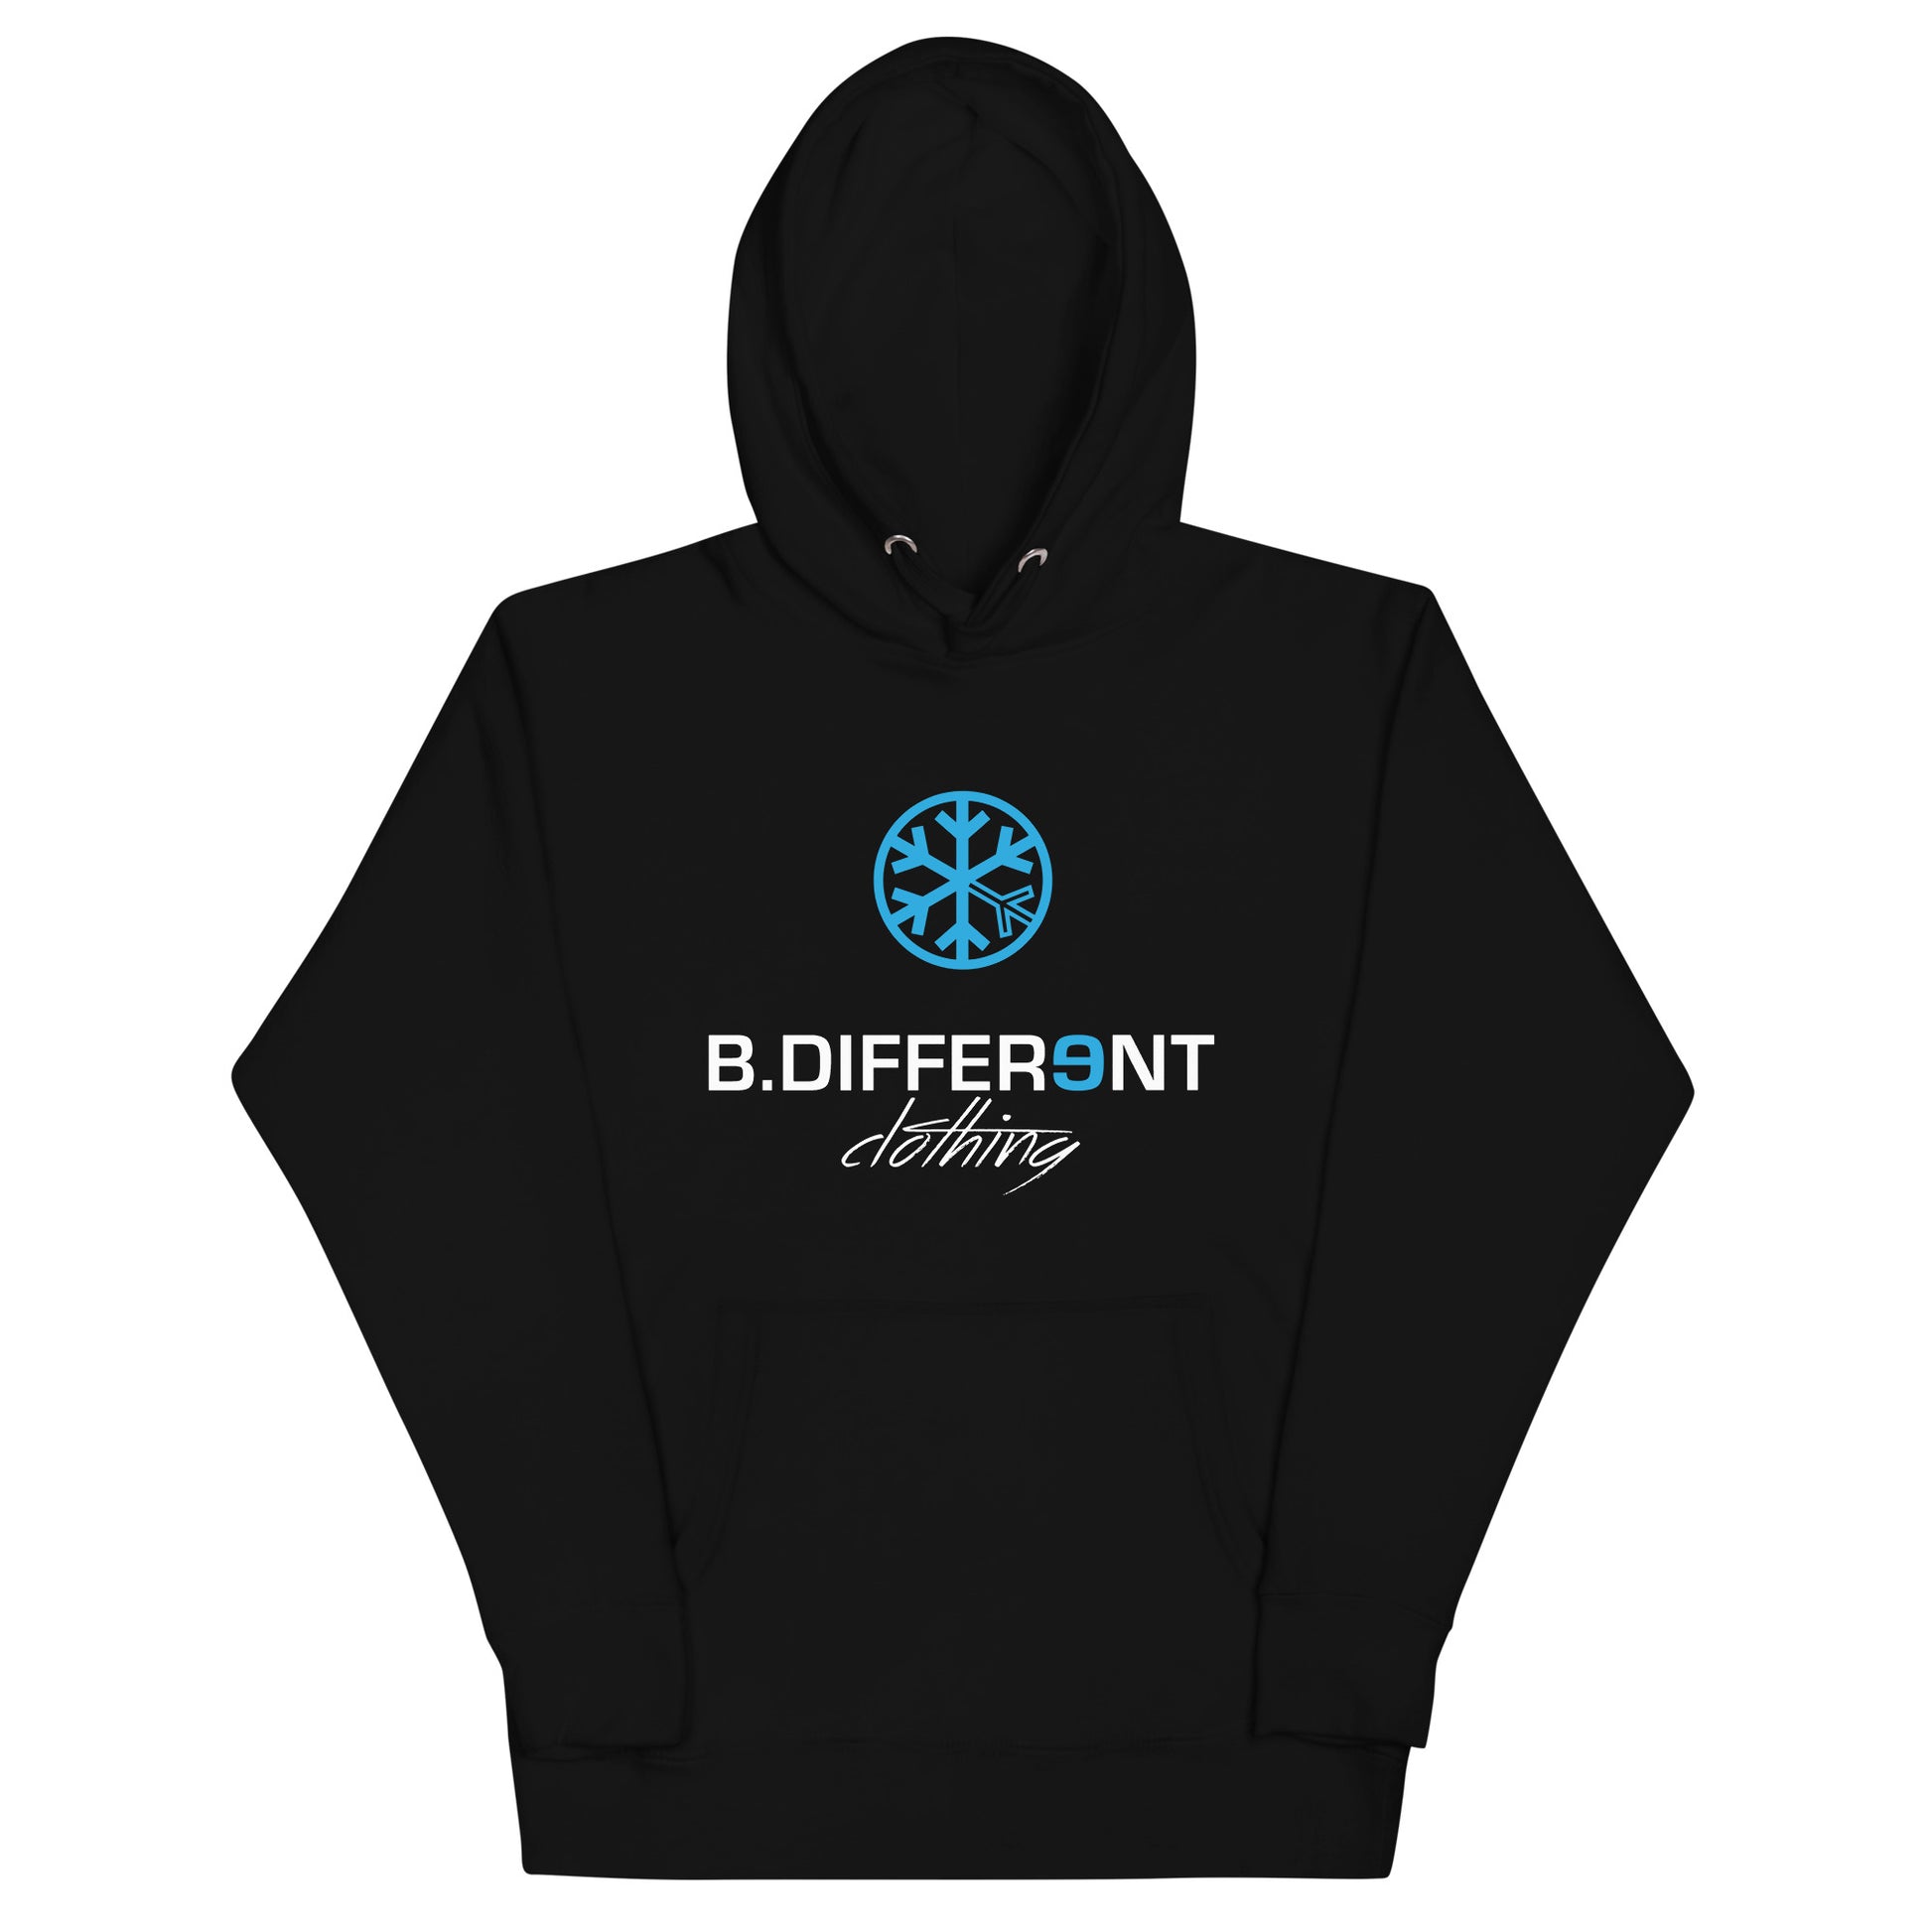 hoodie Logo black by B.Different Clothing independent streetwear brand inspired by street art graffiti